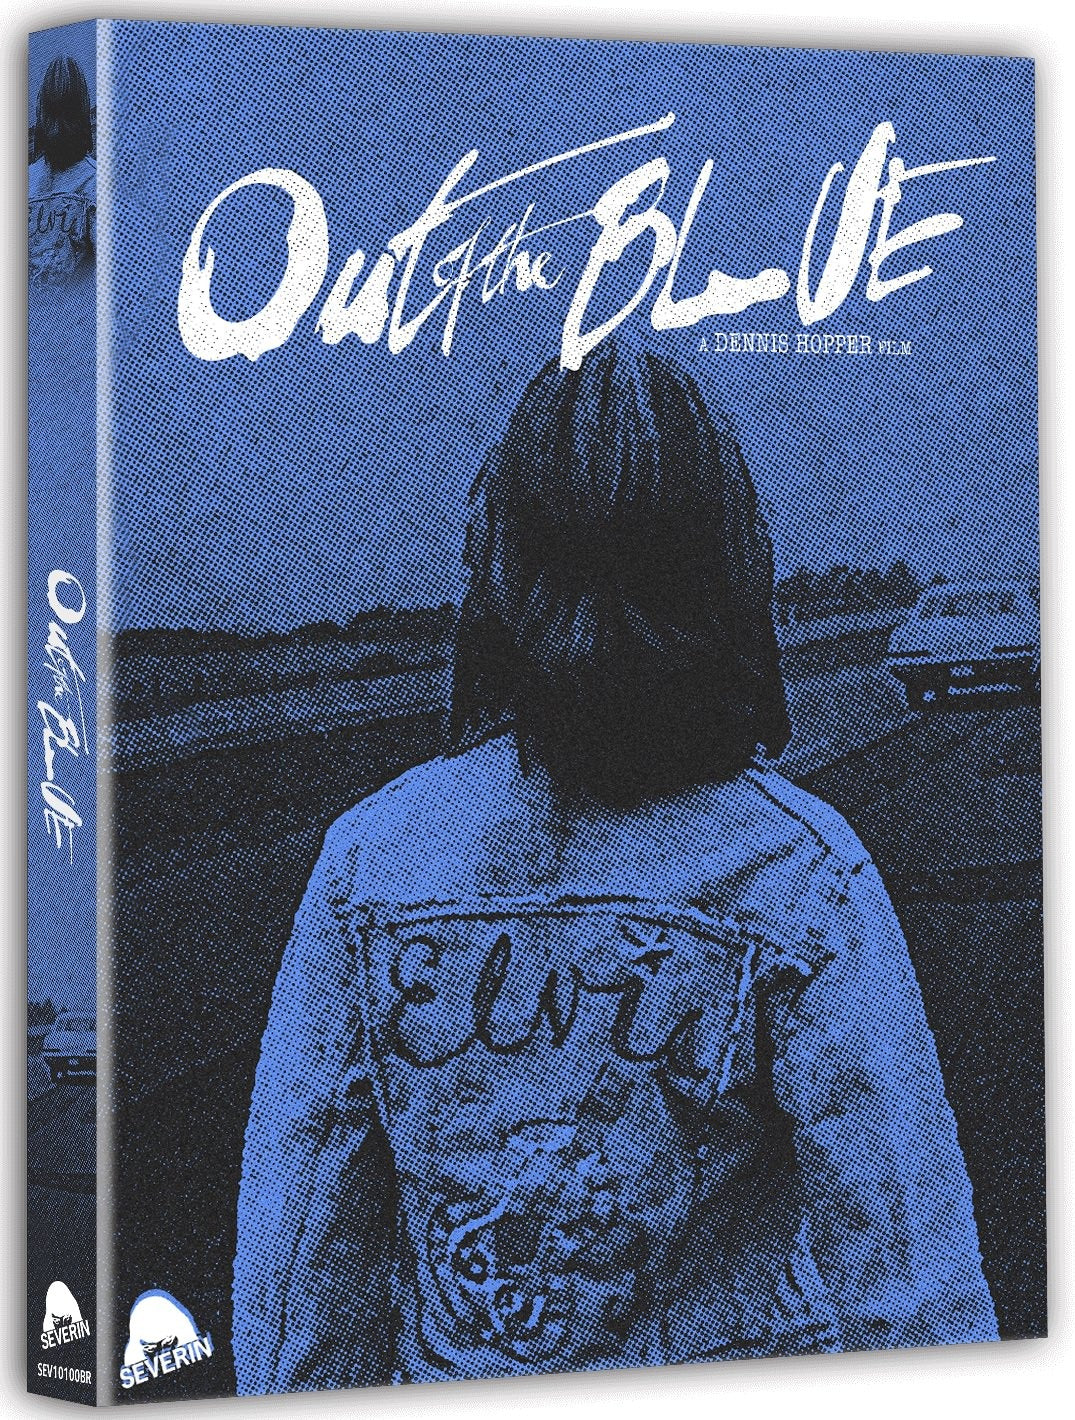 Out of the Blue [2-Disc Blu-ray w/Slipcover]